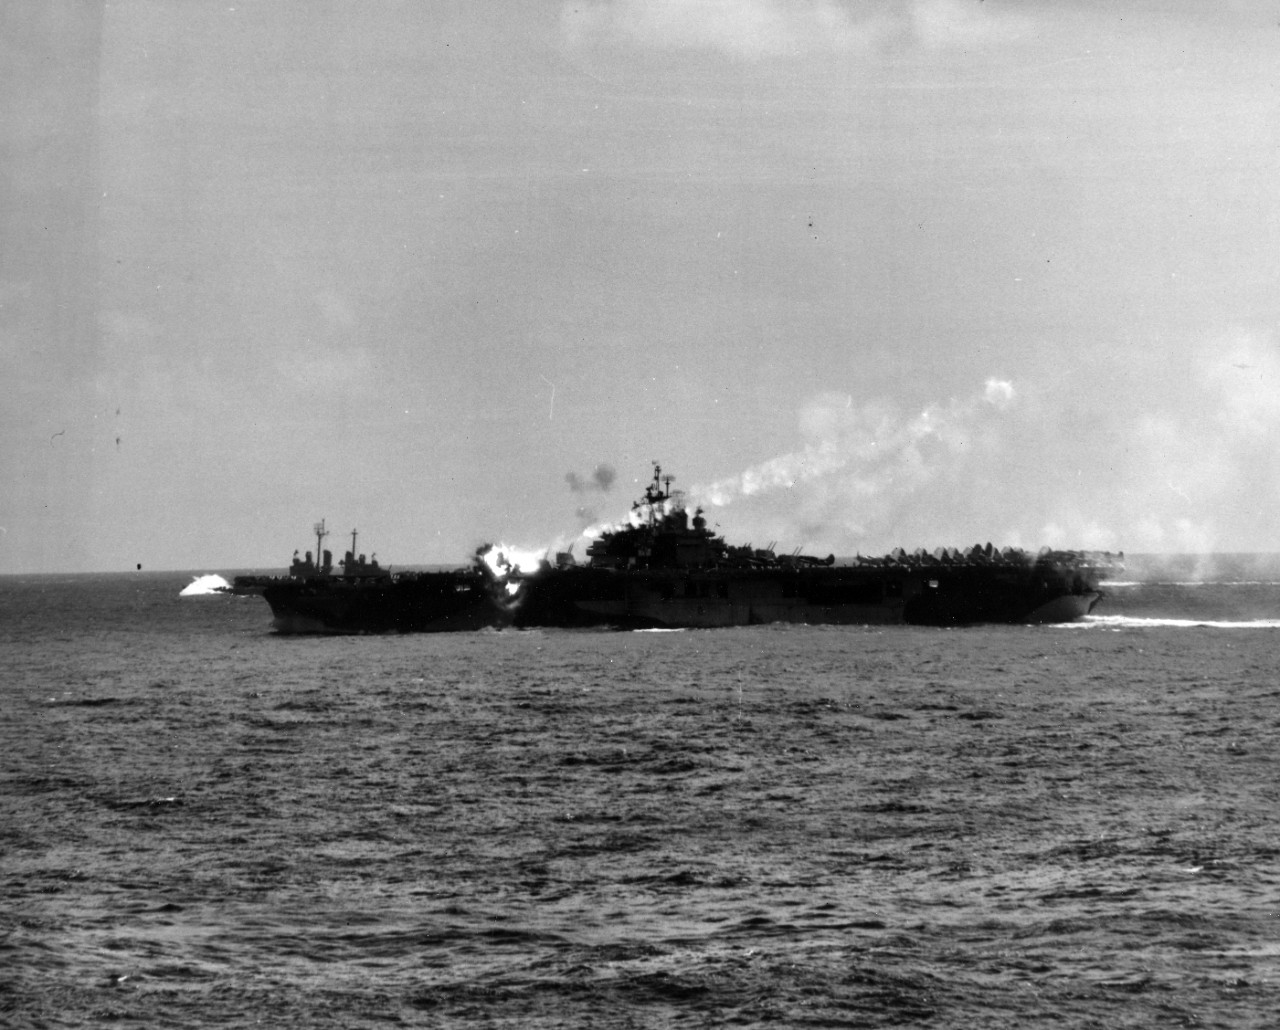 USS Essex struck by Lt. Yoshinori Yamaguchi's special attack D4Y3 Model 33 aircraft, at 1256 hours on 25 Nov 1944, photo 03 of 10